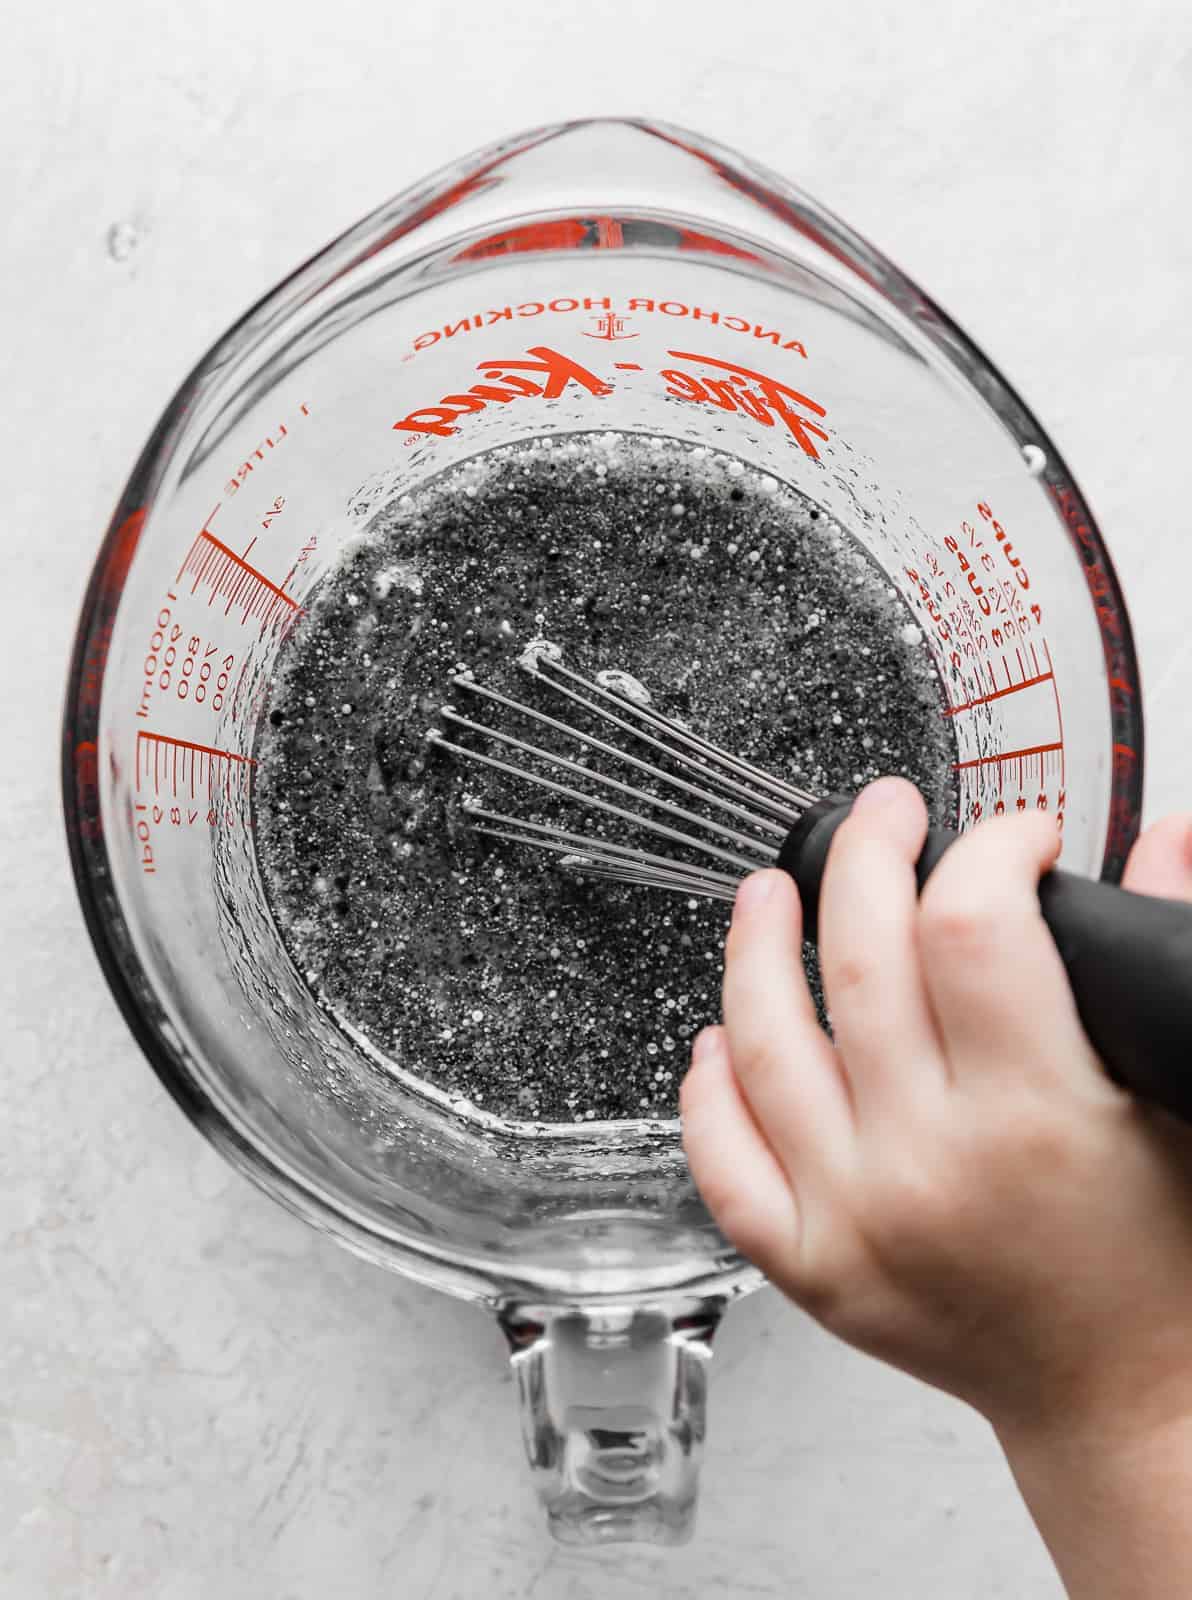 A dark gray liquid mixture in a glass measuring cup, with someone using a whisk to mix it.